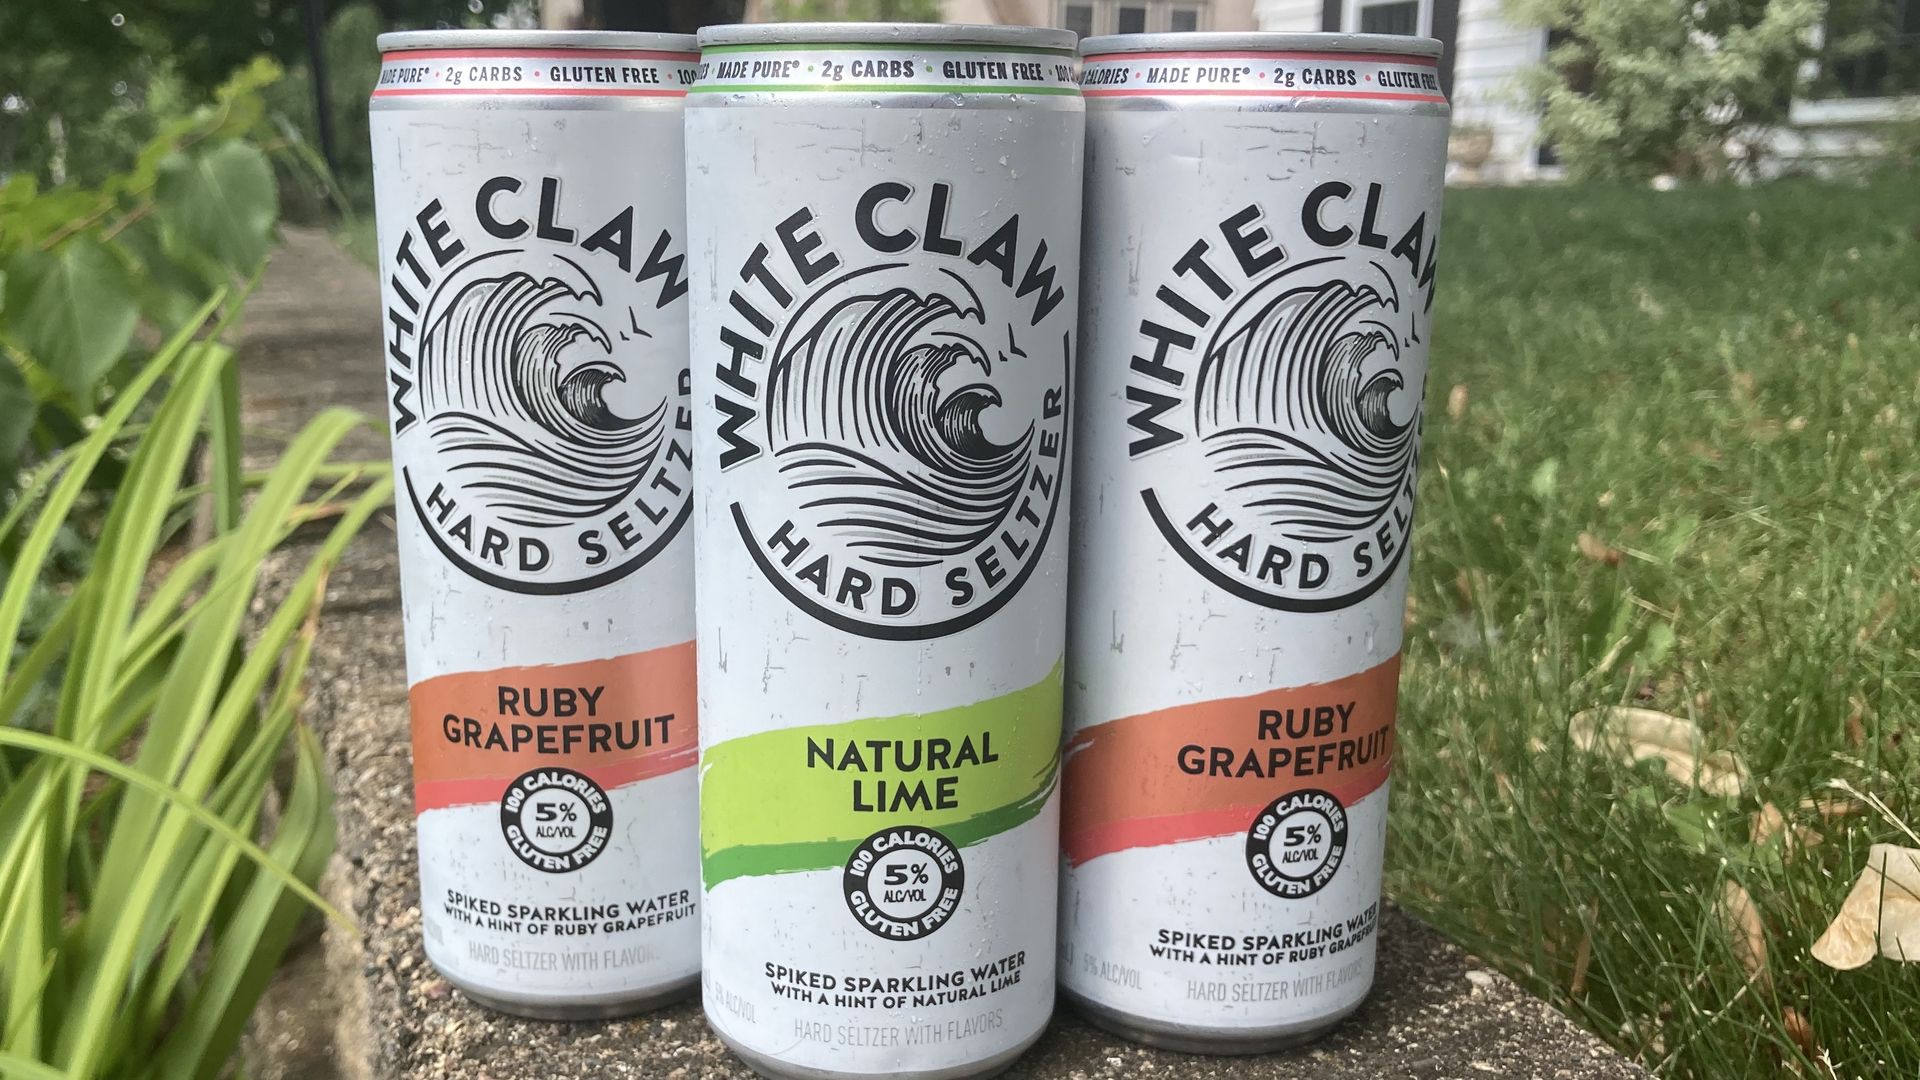 Three cans of White Claws